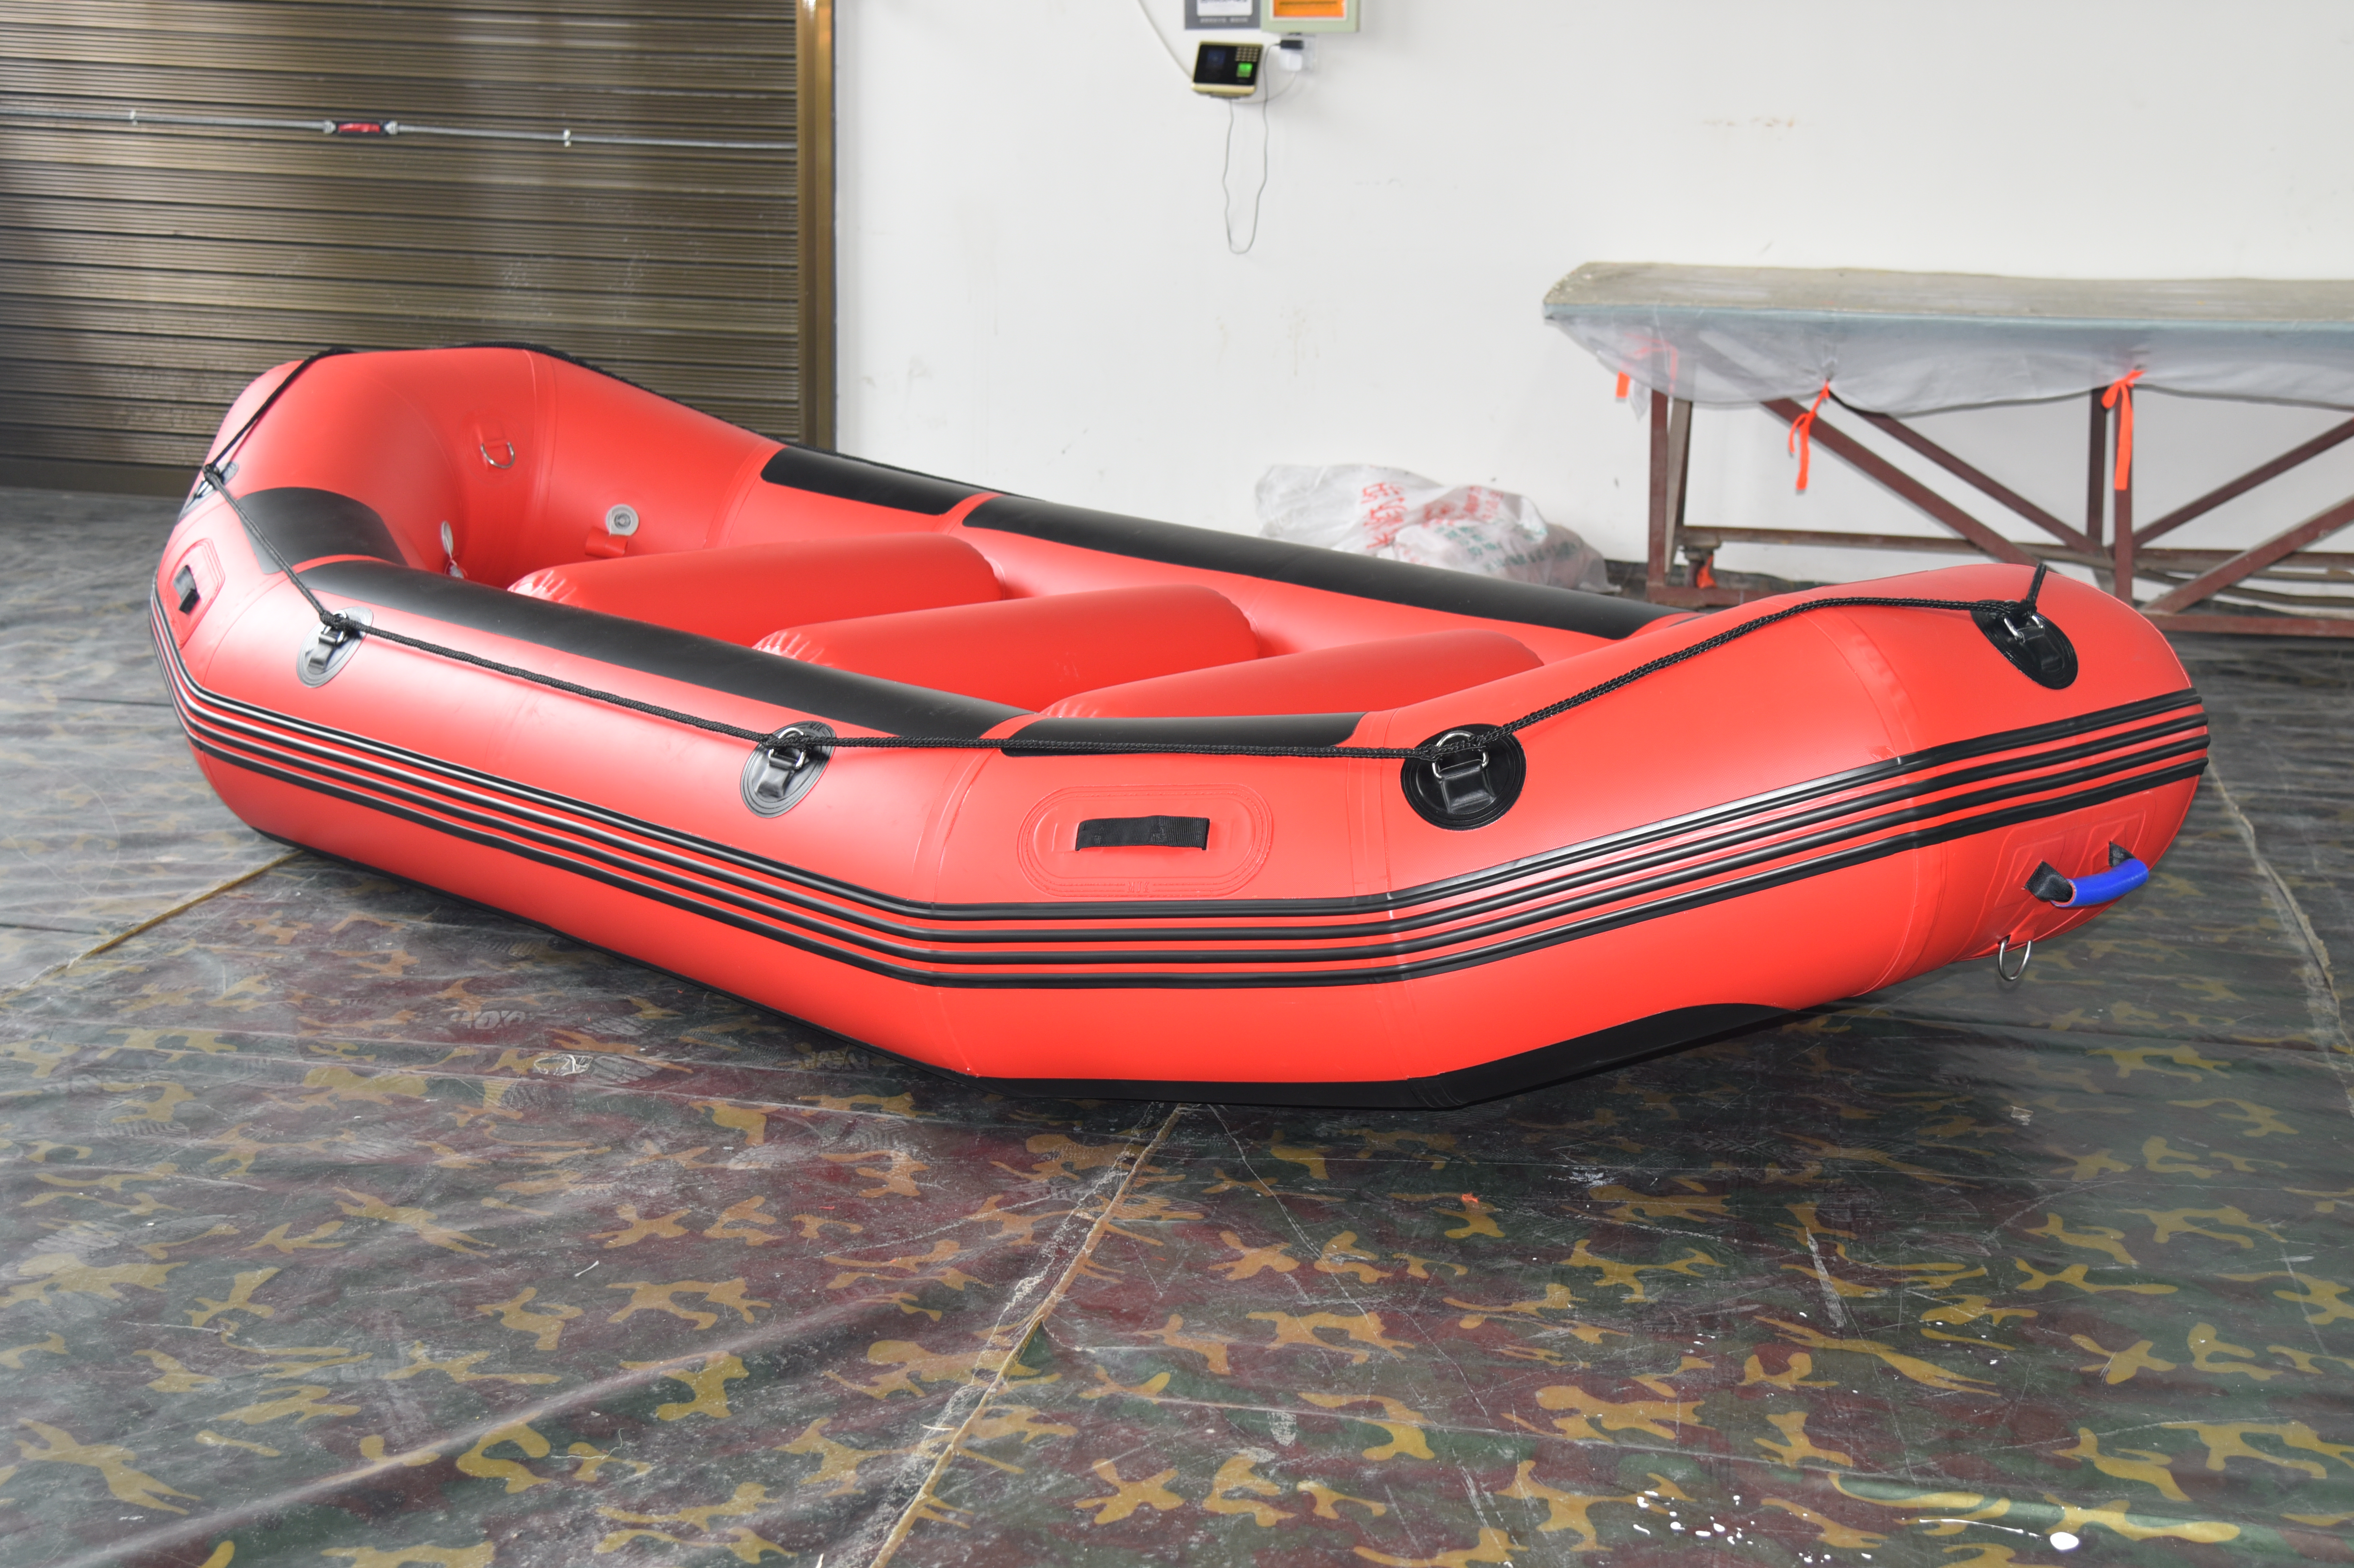 Price Of 13 Feet 8 Person Inflatable Boat 395cm Whitewater Rafting Boat For Drifting